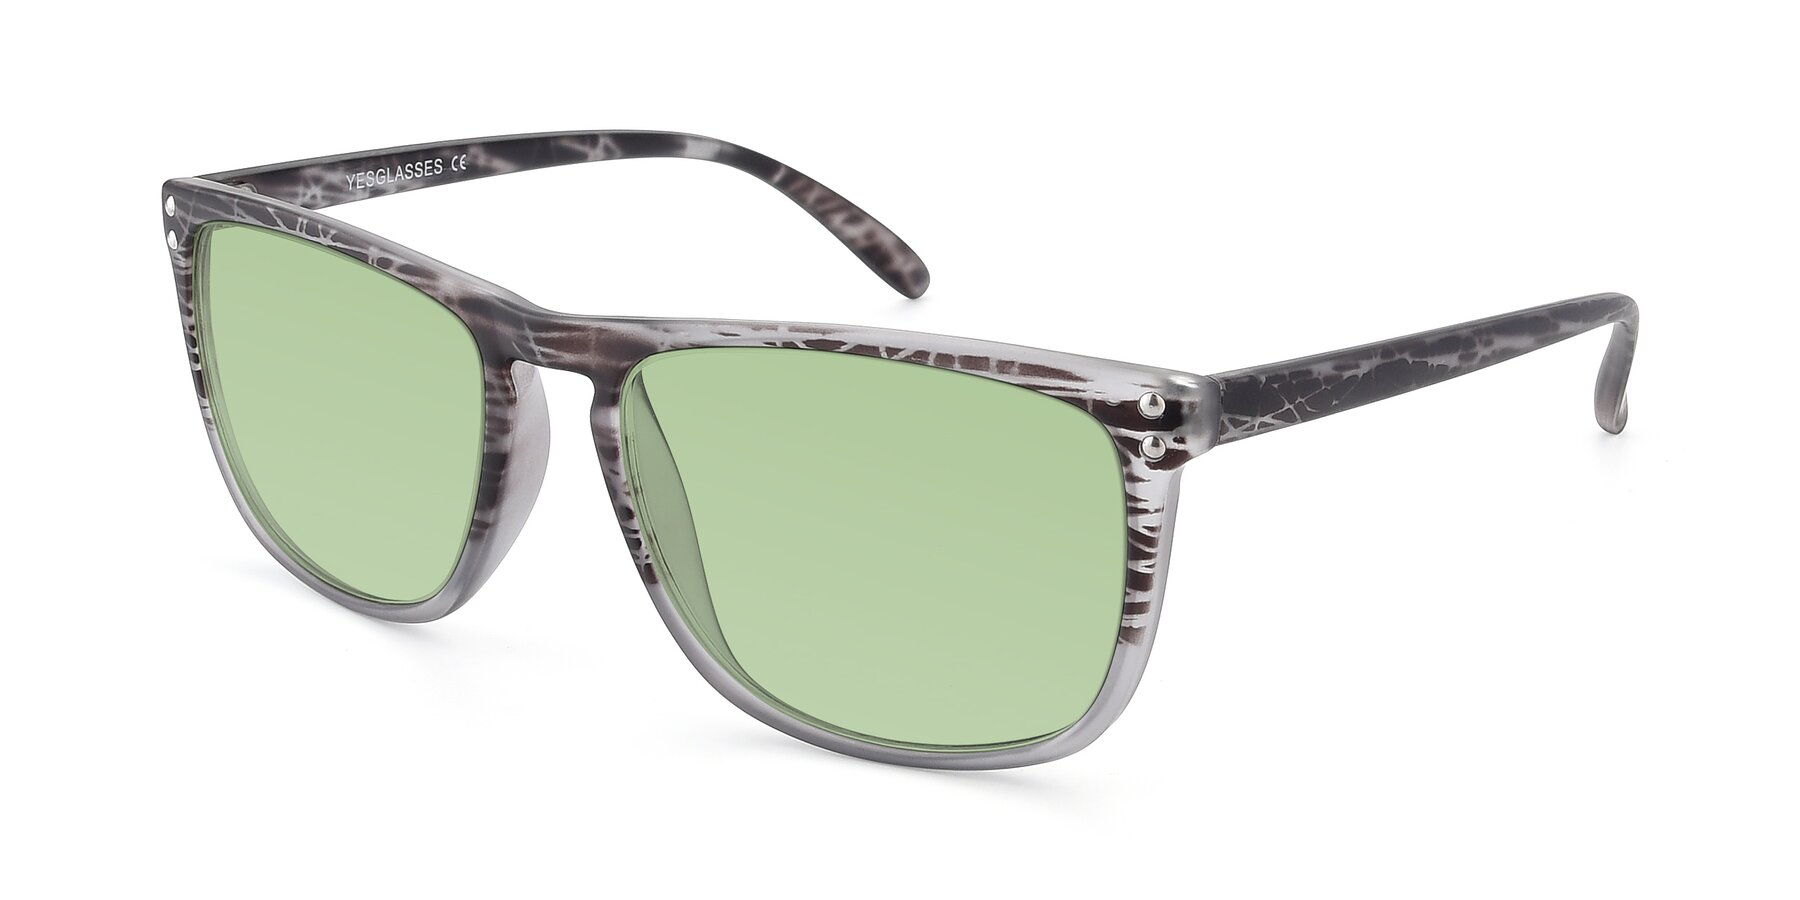 Angle of SSR411 in Translucent Floral Grey with Medium Green Tinted Lenses